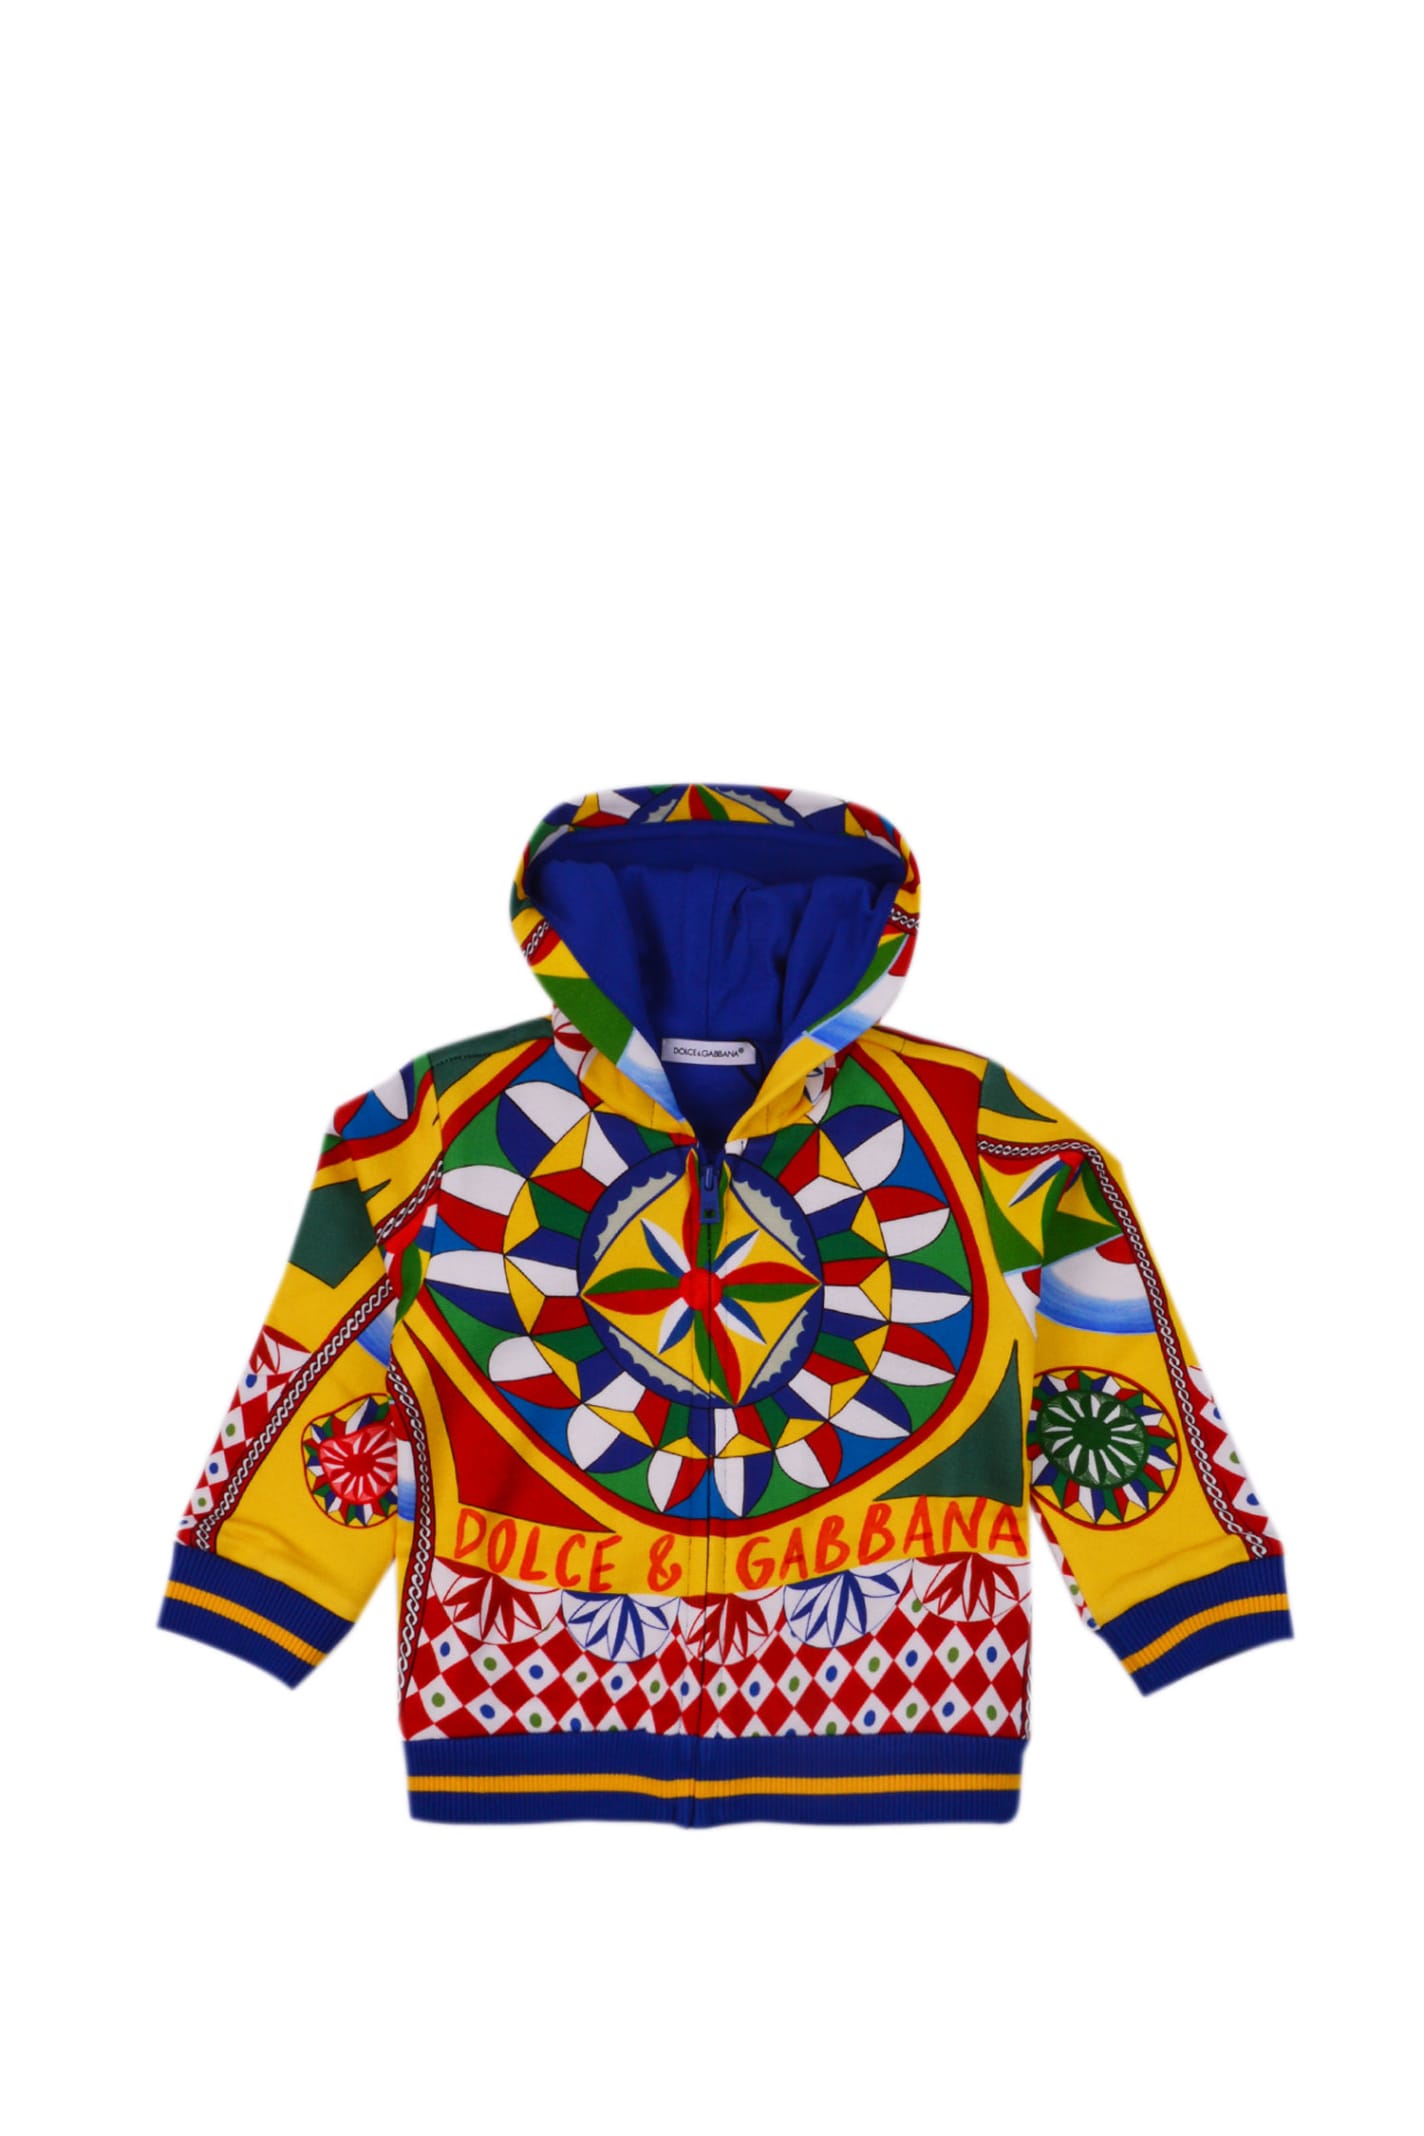 Dolce & Gabbana Babies' Hooded Sweatshirt With Cart Print In Multicolor